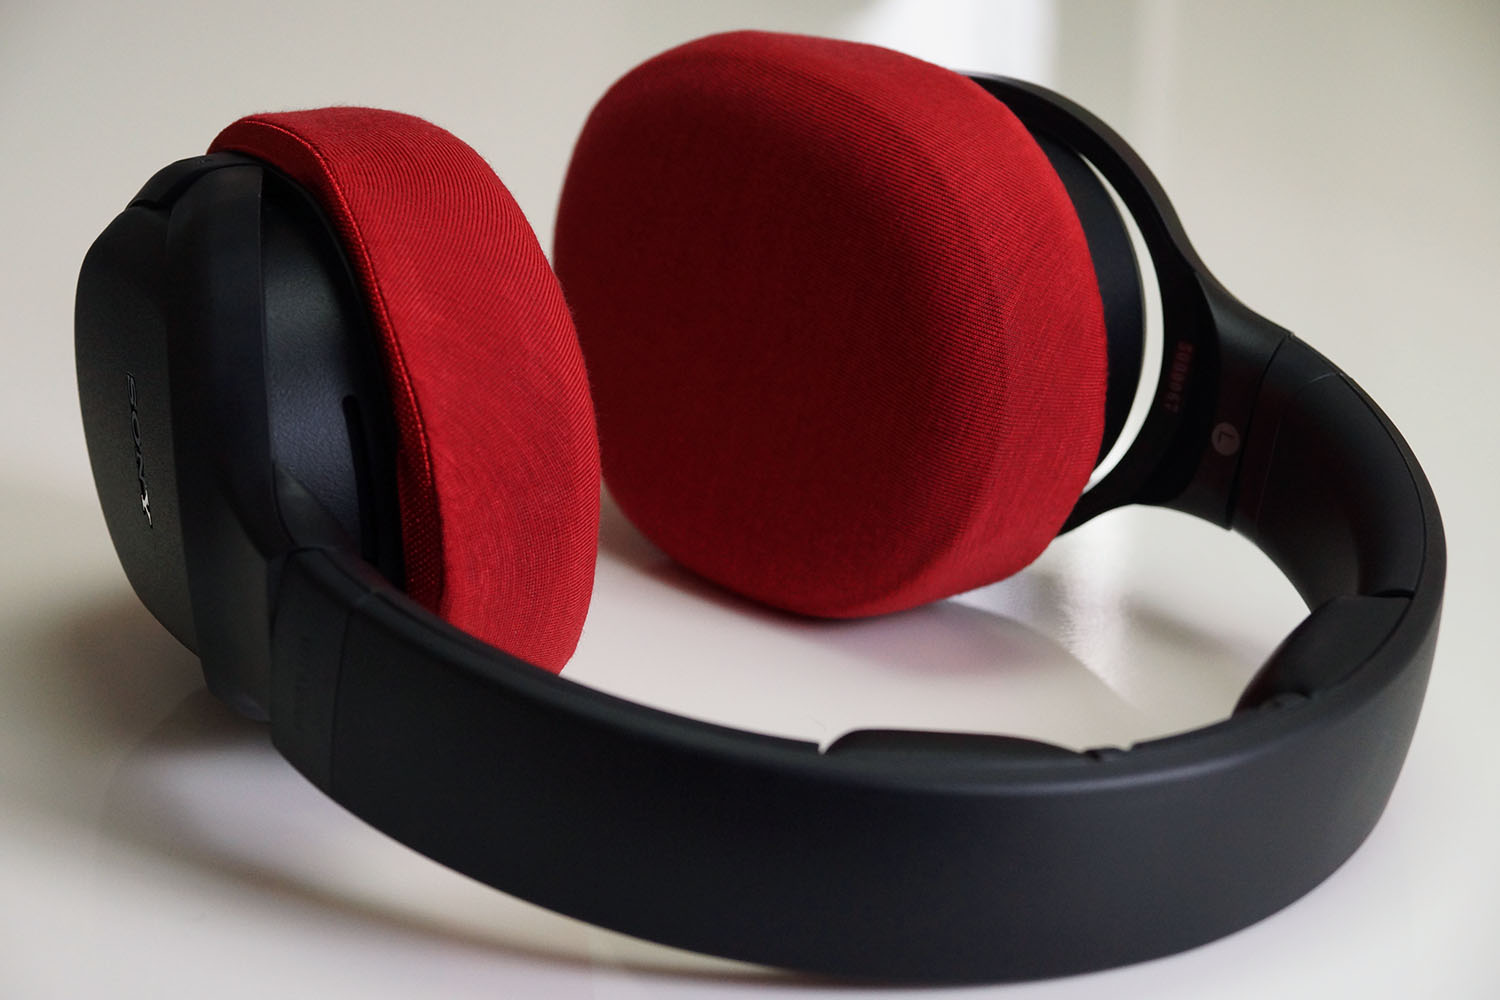 SONY WH-L600 earpad repair and protection: Super Stretch Headphone